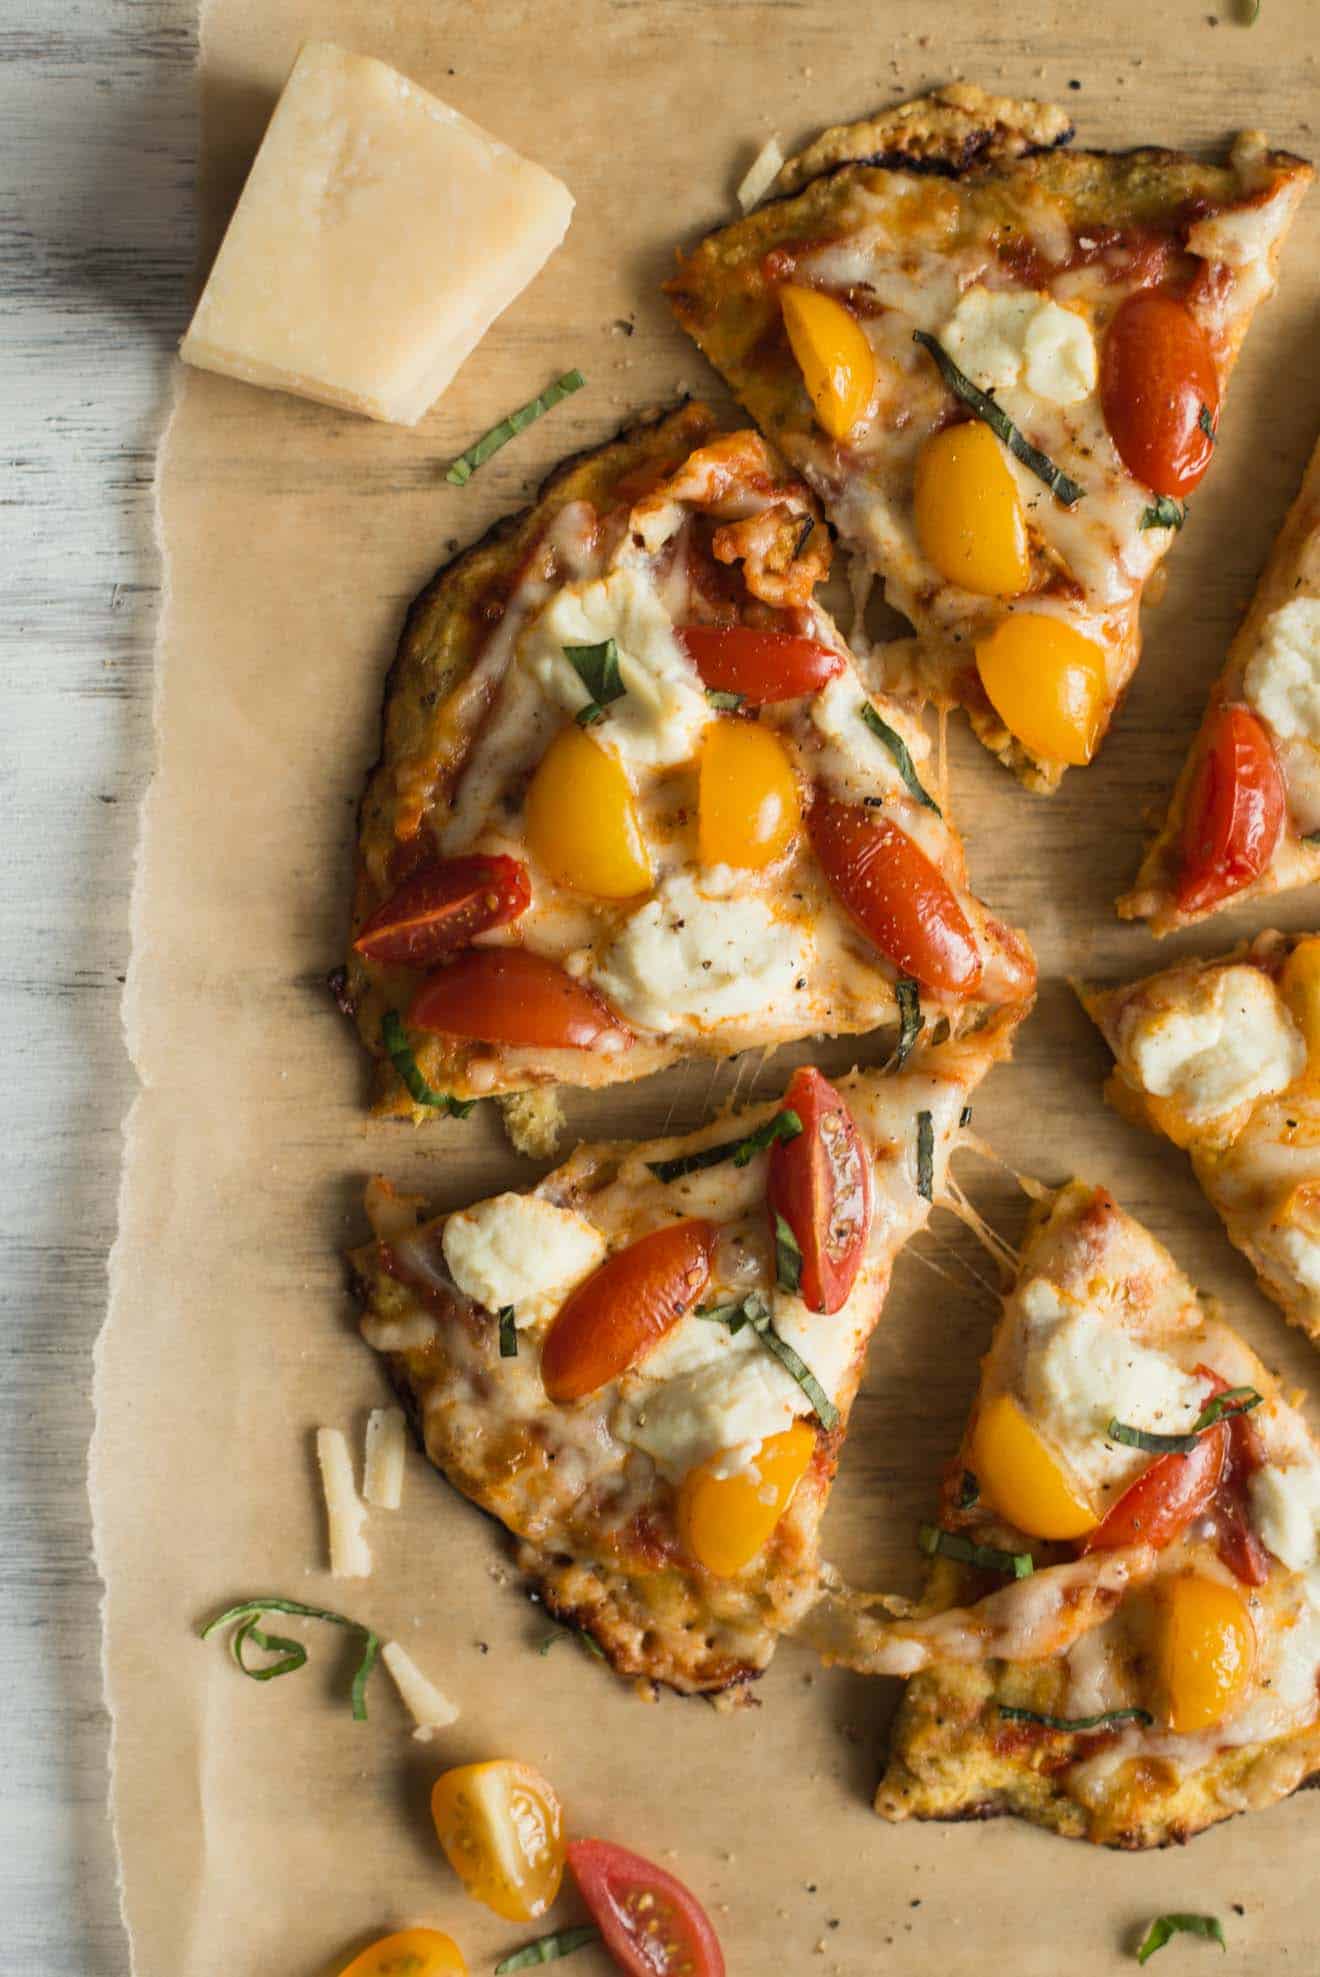 Three Cheese Plantain Crust Pizza - easy, gluten-free pizza ready in 30 minutes! by @healthynibs